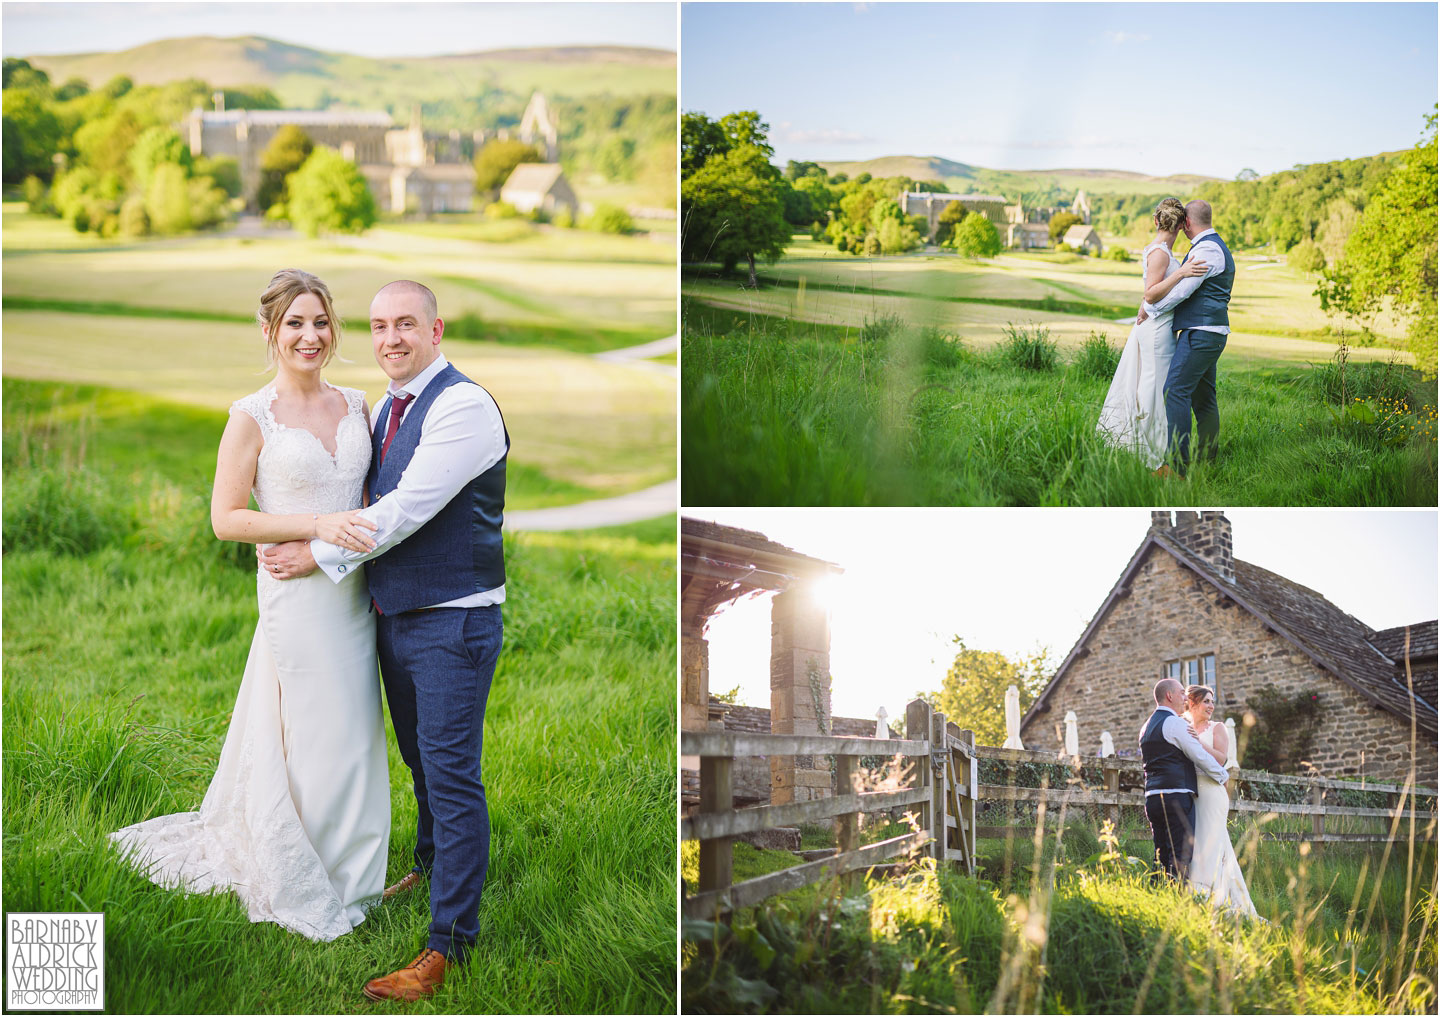 Golden Hour at the Tithe Barn at Bolton Abbey, Tithe Barn Bolton Abbey wedding photos, Tithe Barn Wedding Photographer, Bolton Abbey Tithe Barn Wedding, Yorkshire Dales Wedding, Yorkshire Dales Wedding Venue, Bolton Abbey wedding, Yorkshire Wedding Photographer